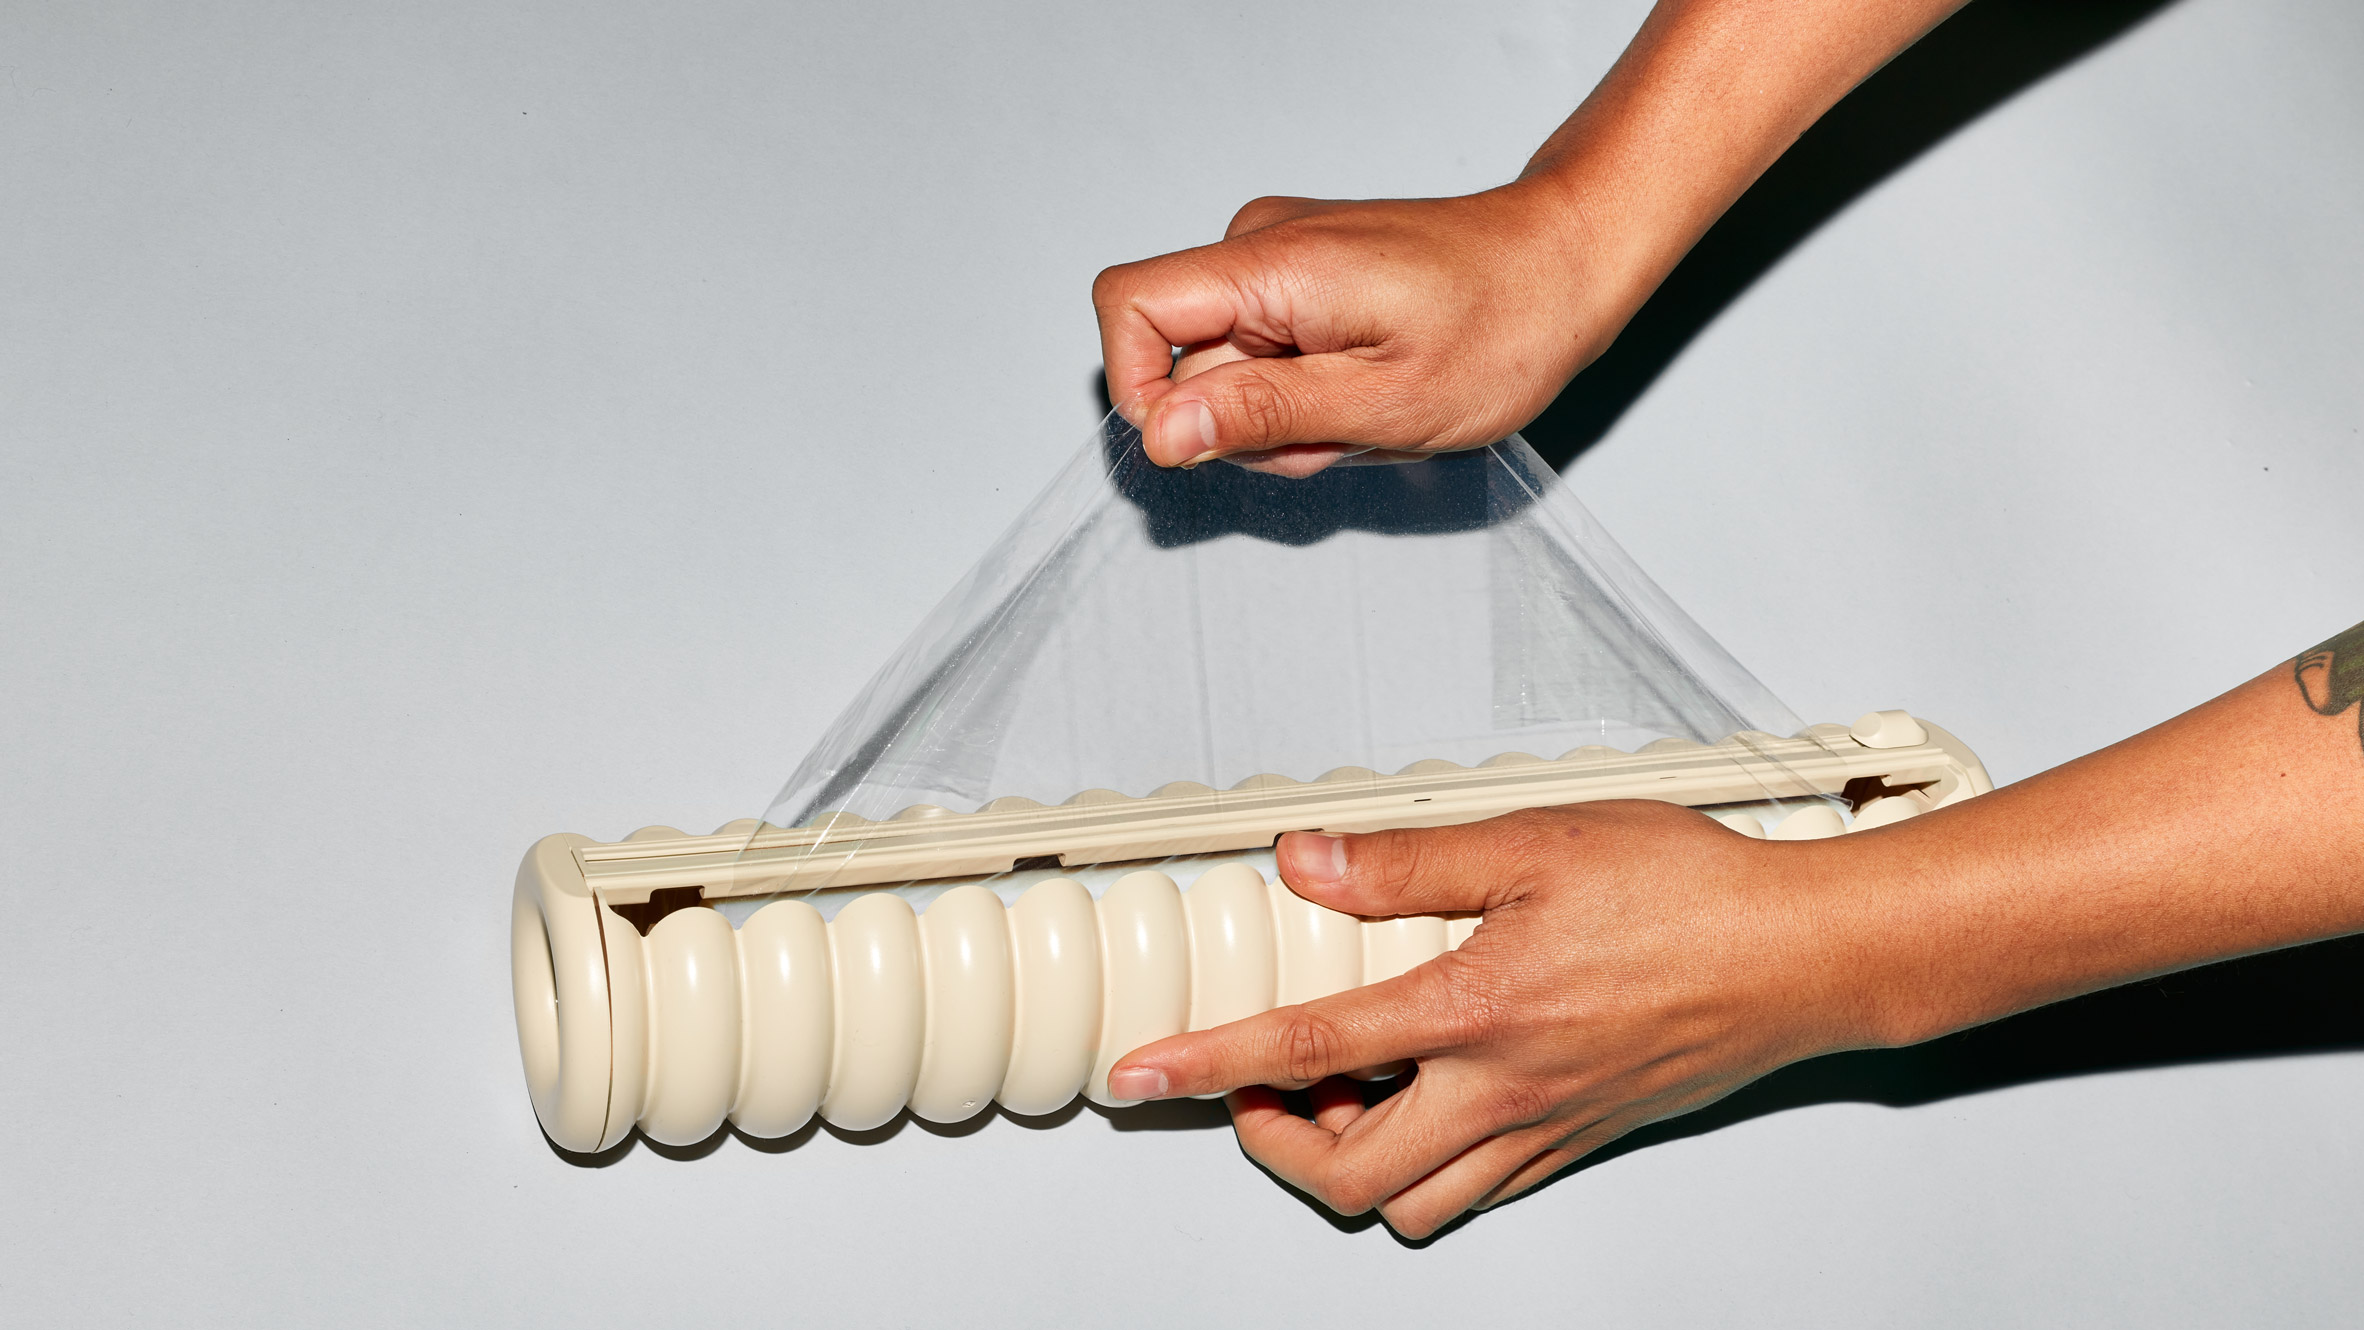 Sway makes an ingenious alternative to plastic cling wrap